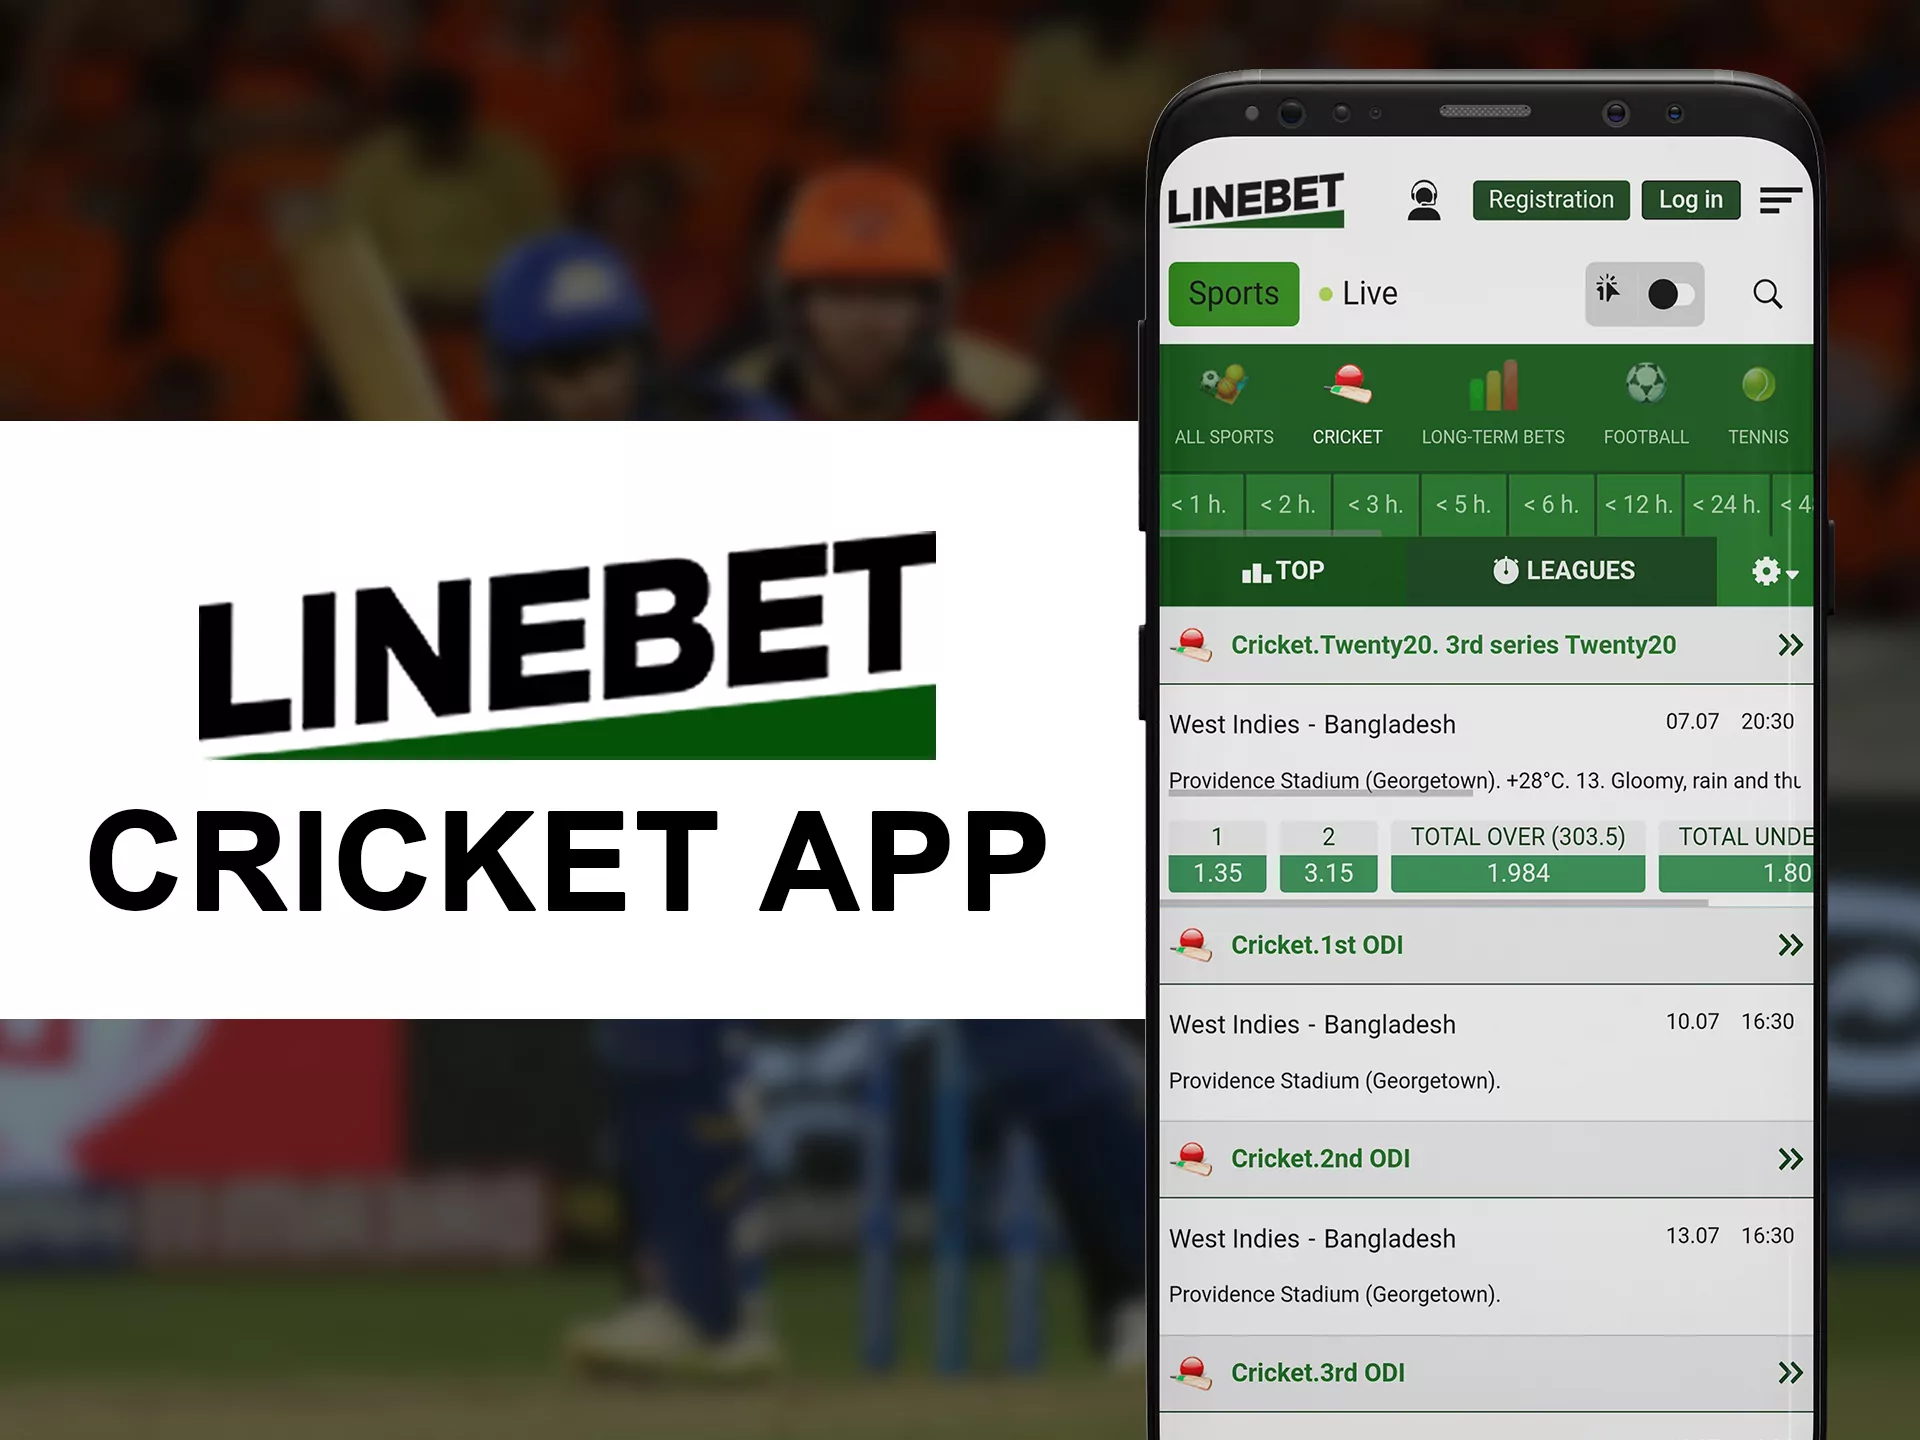 Bet on your favourite cricket team at Linebet online bookmaker.